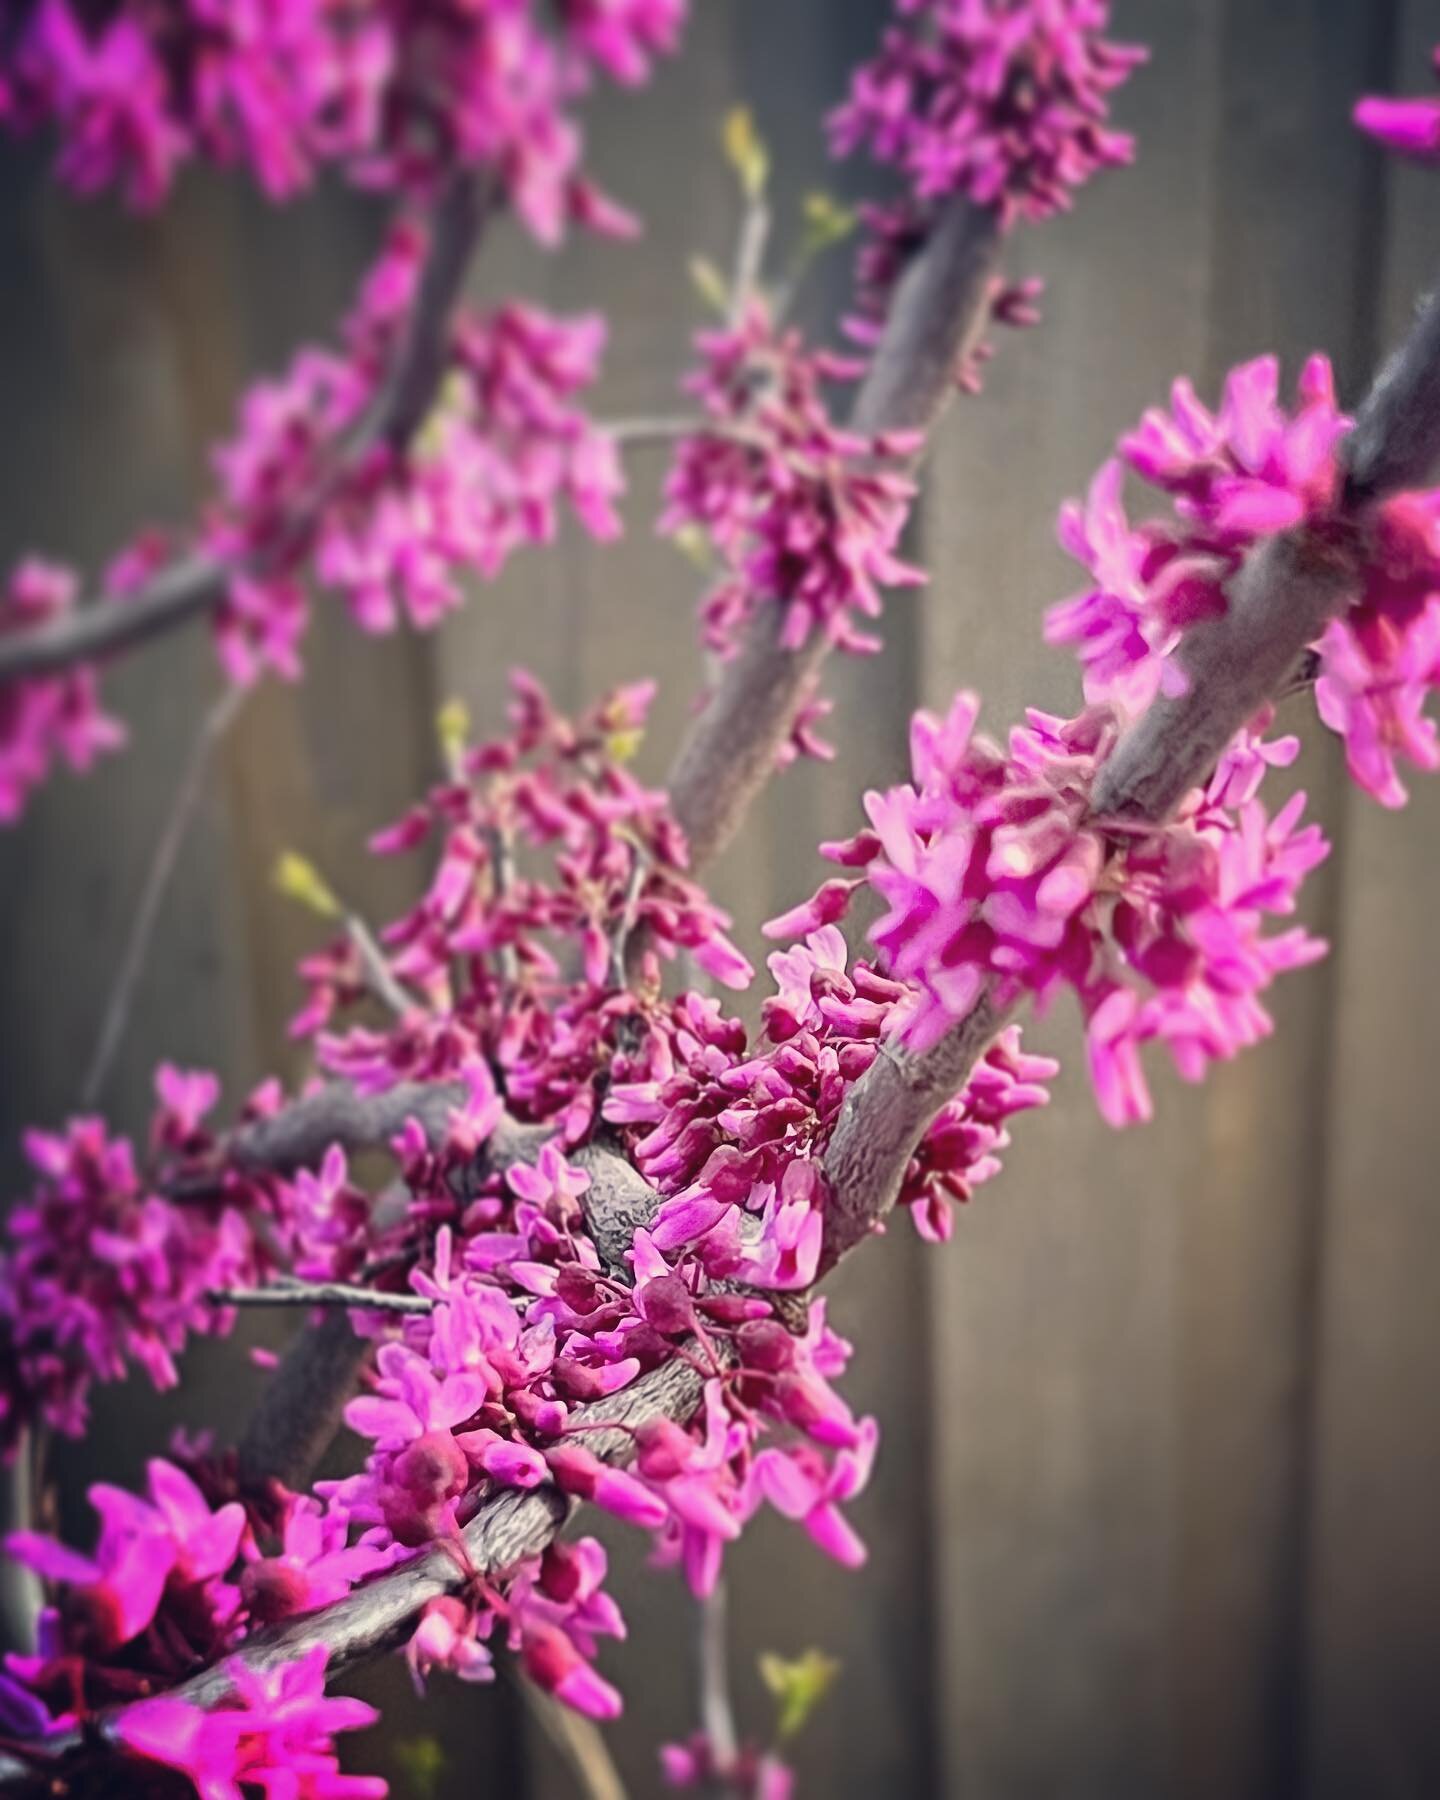 Forest pansy redbud blooming out, and attracting arachnid friends. 🕷️